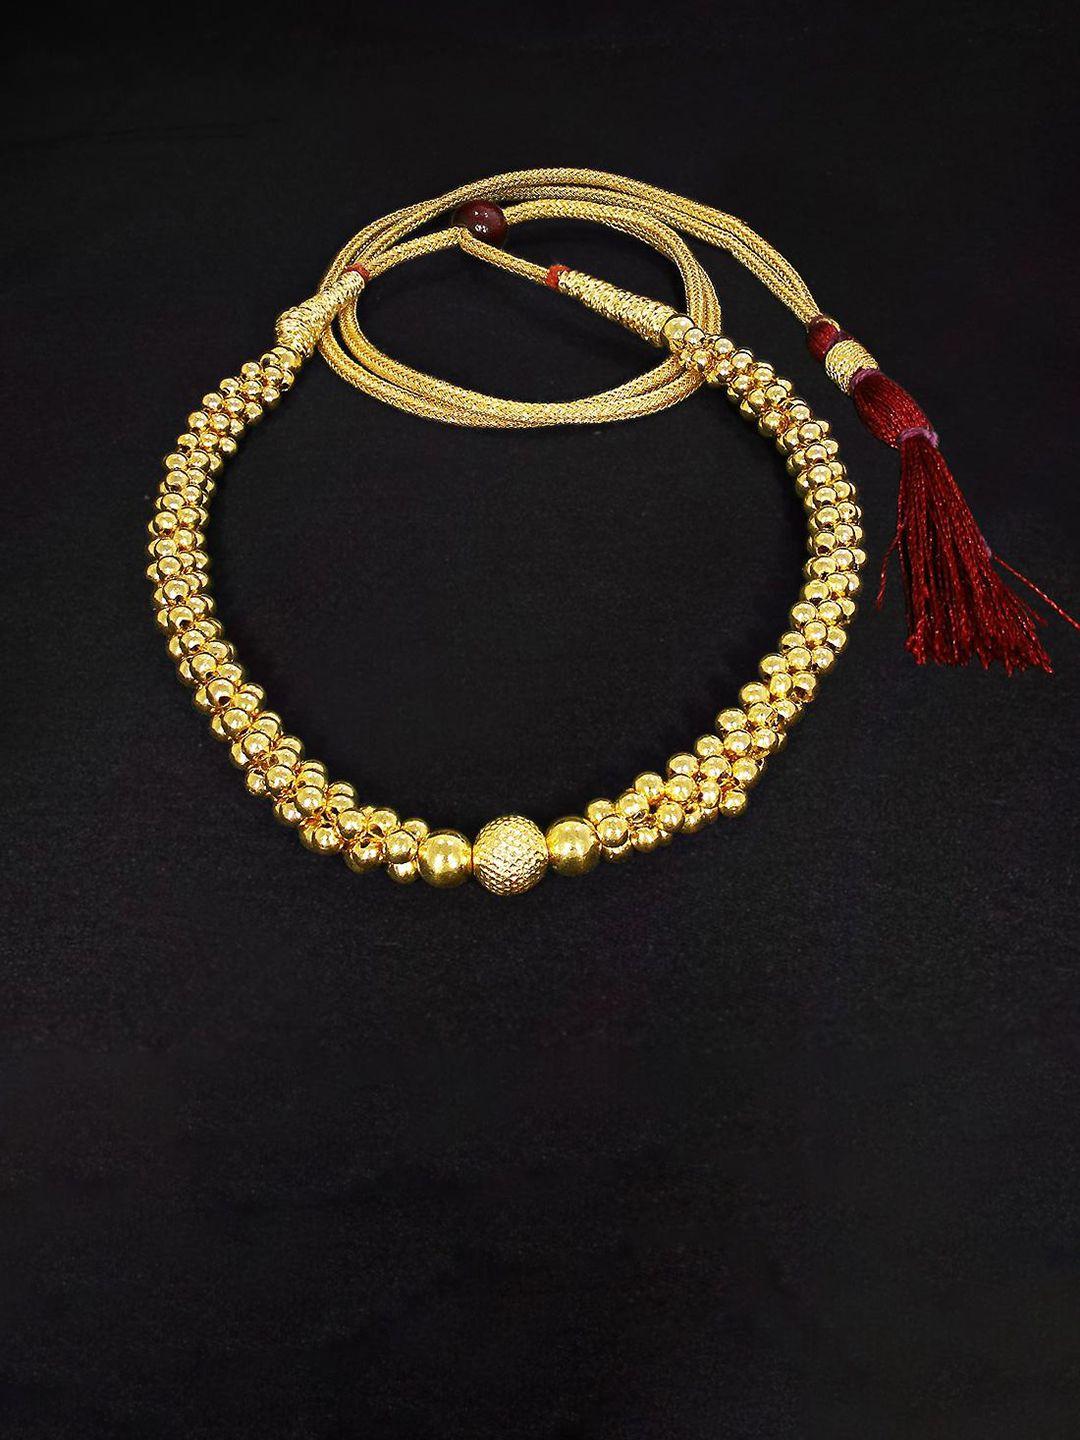 candere a kalyan jewellers company 22kt gold tushi choker necklace gold-2.6gm